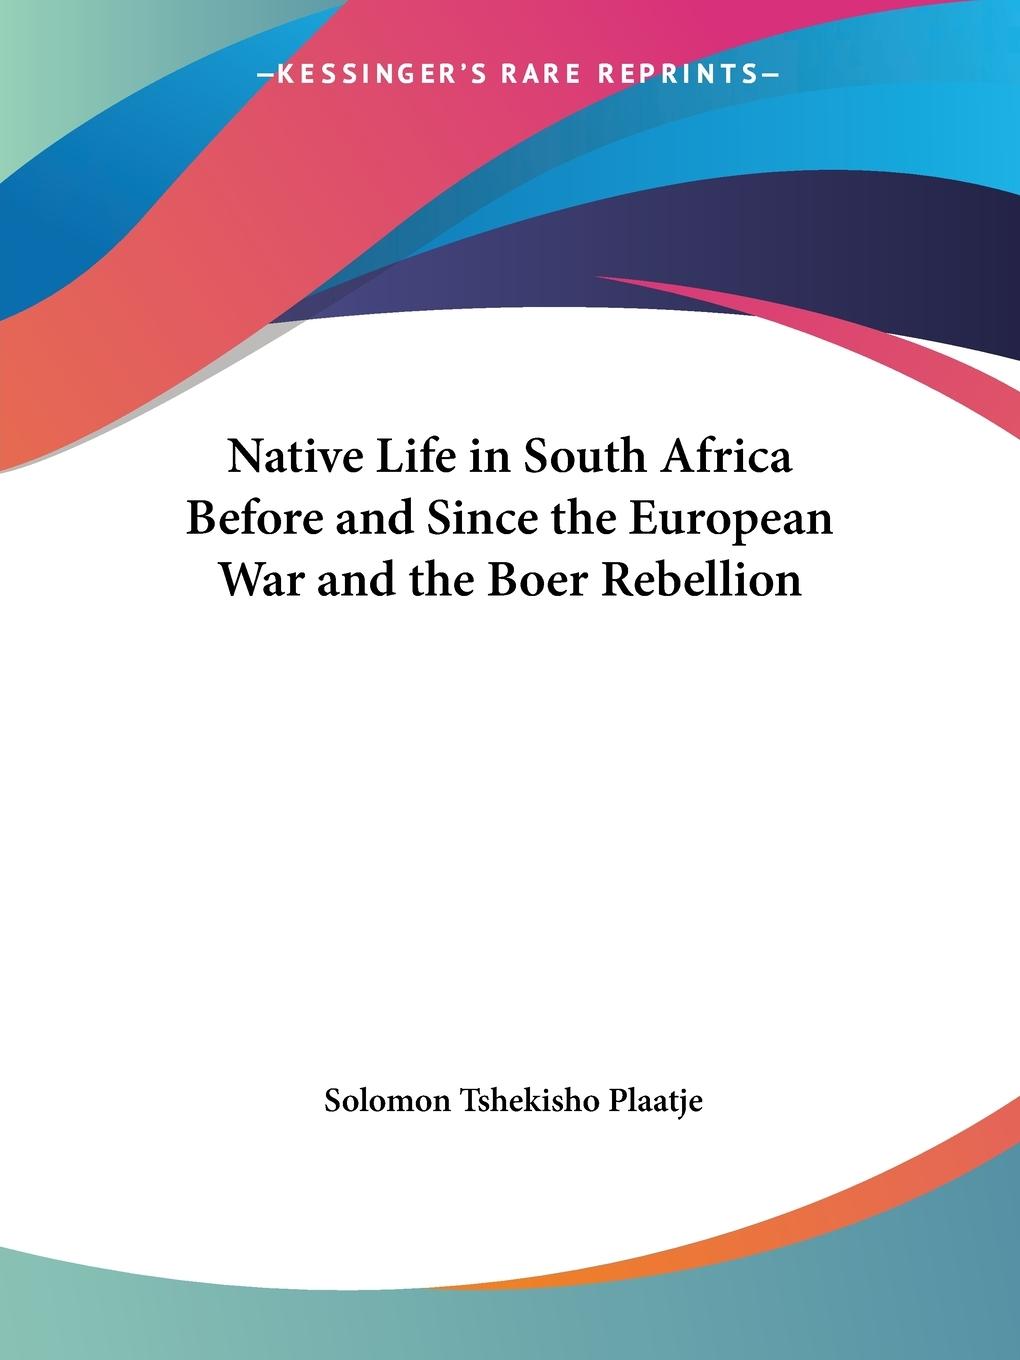 Native Life in South Africa Before and Since the European War and the Boer Rebellion - Plaatje, Solomon Tshekisho